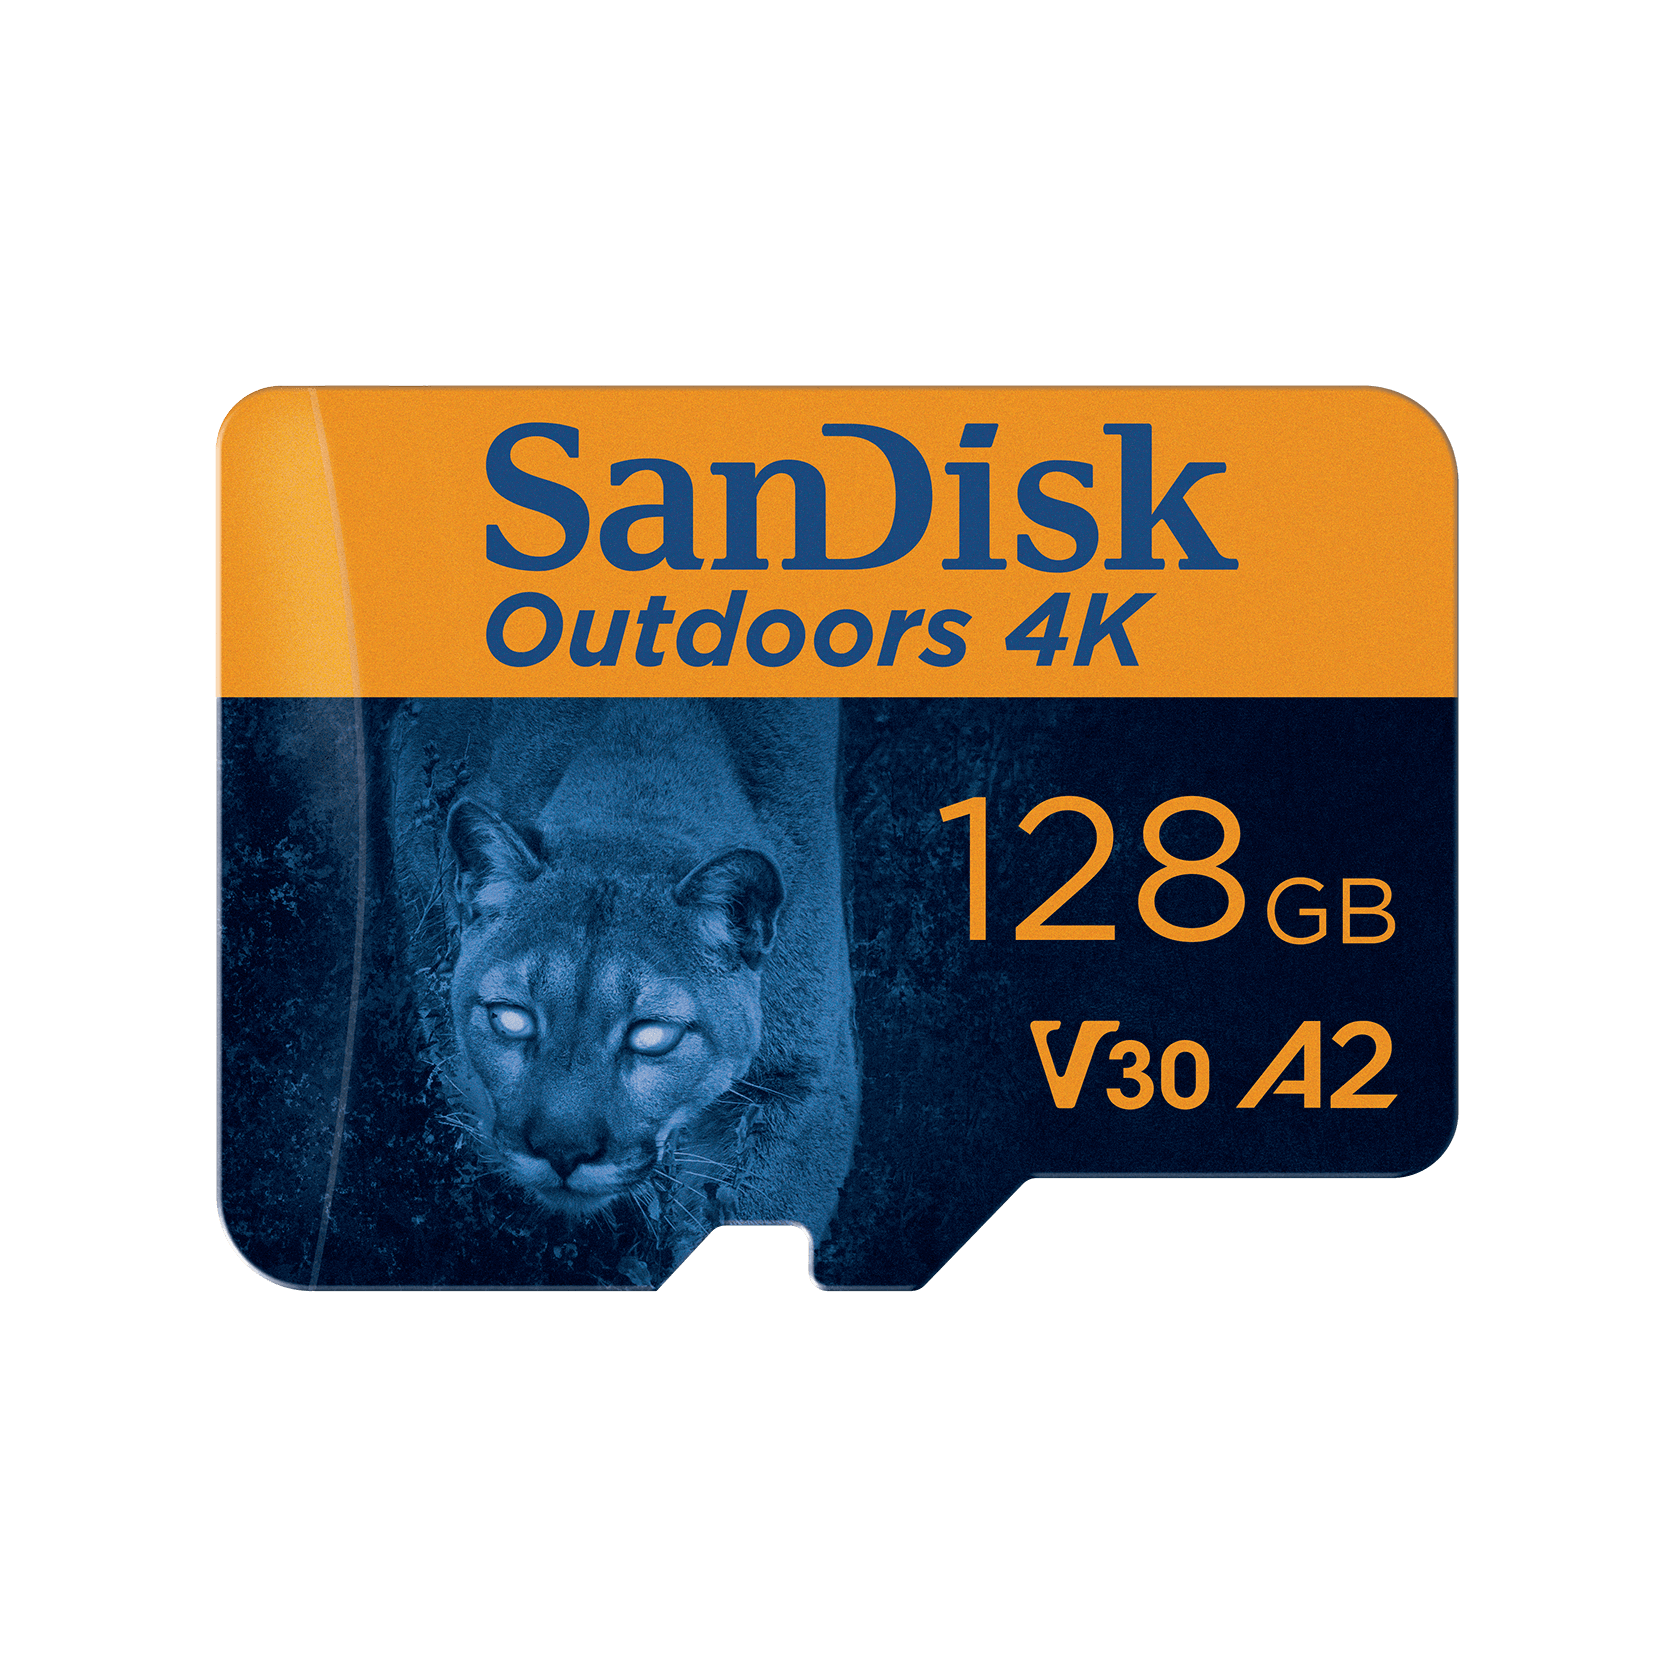 SanDisk Outdoors 4K MicroSDXC UHS-I Card With SD Adapter - 128GB - SDSQXAA-128G-GN6VA